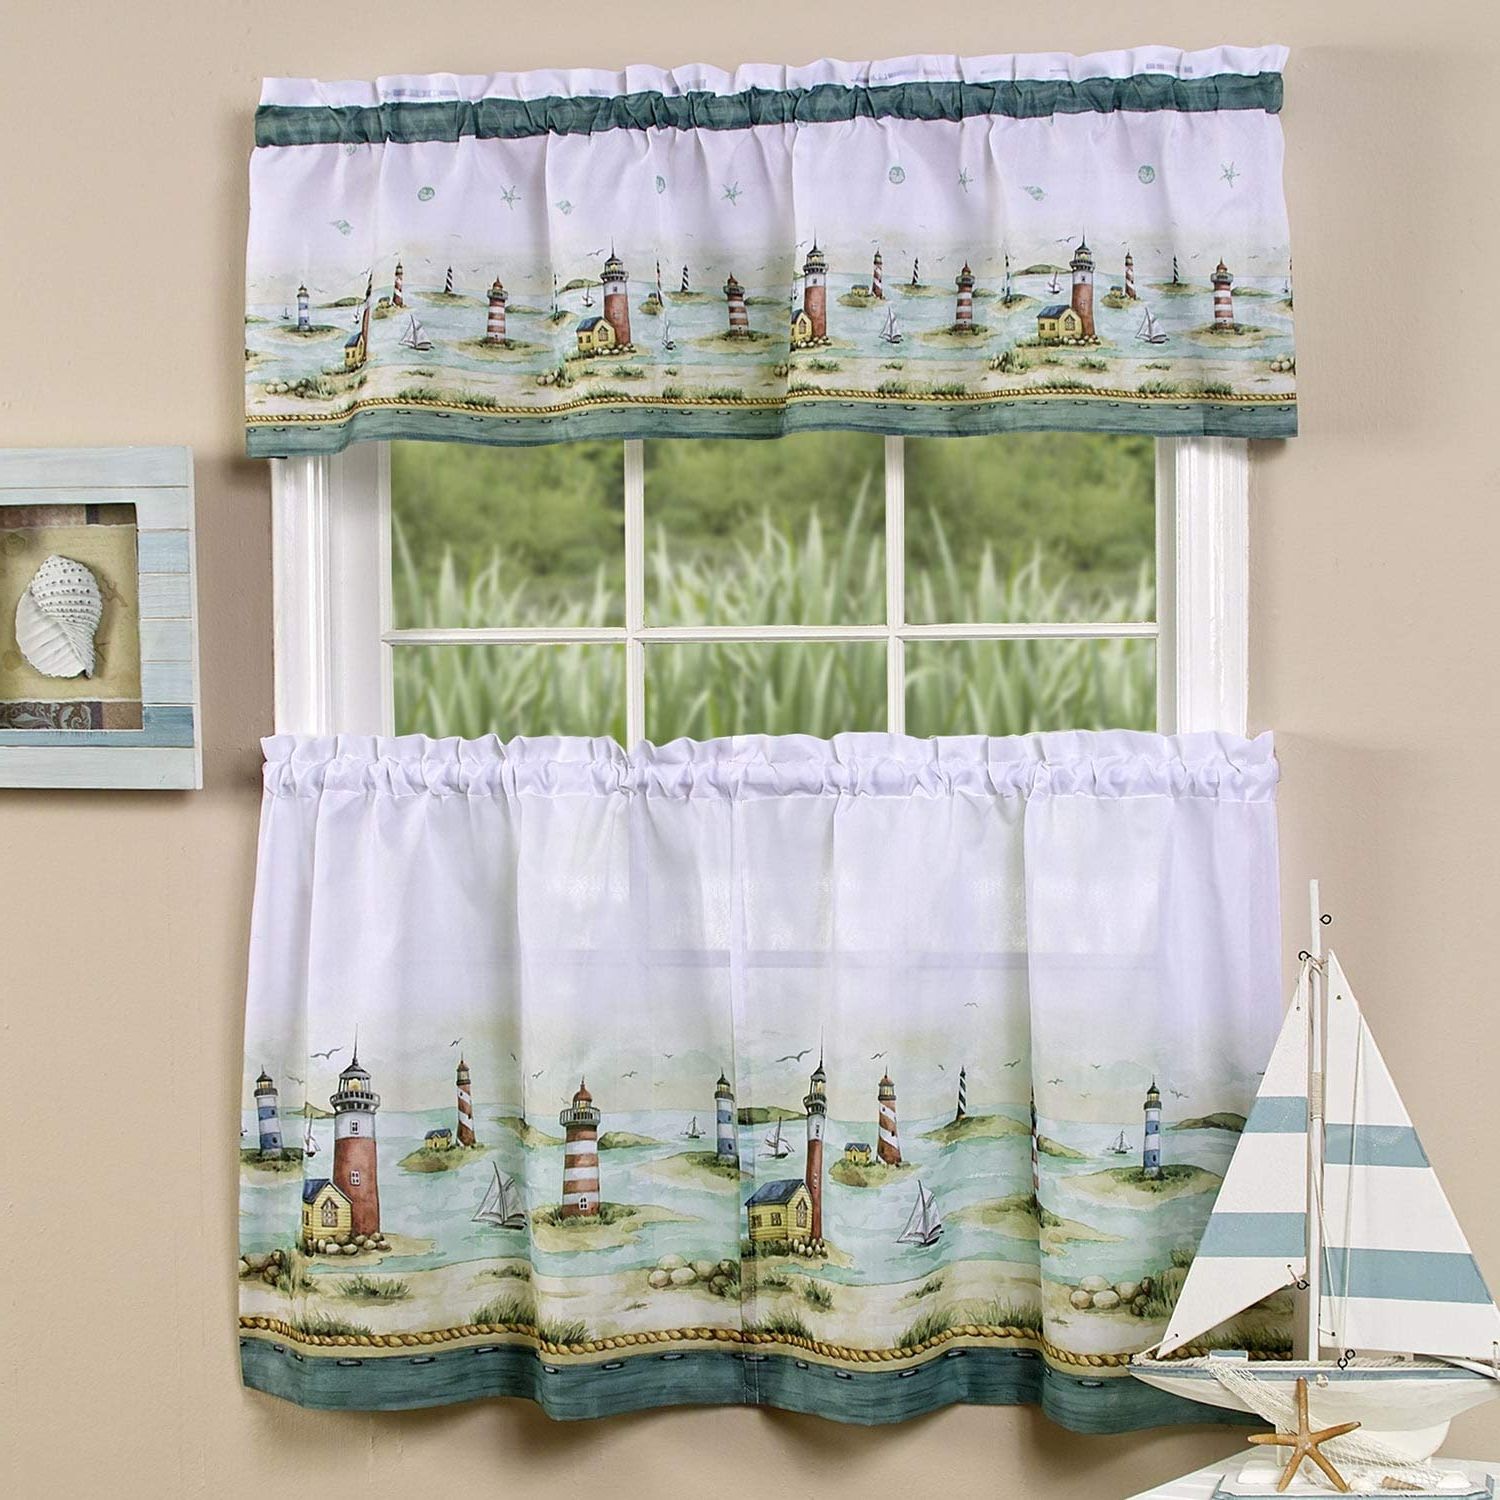 Most Recent Traditional Two Piece Tailored Tier And Valance Window Curtains With Bed Bath N More Traditional Two Piece Tailored Tier And Valance Window  Curtains Set With Detailed Lighthouse Print – 36 Inch (View 1 of 20)